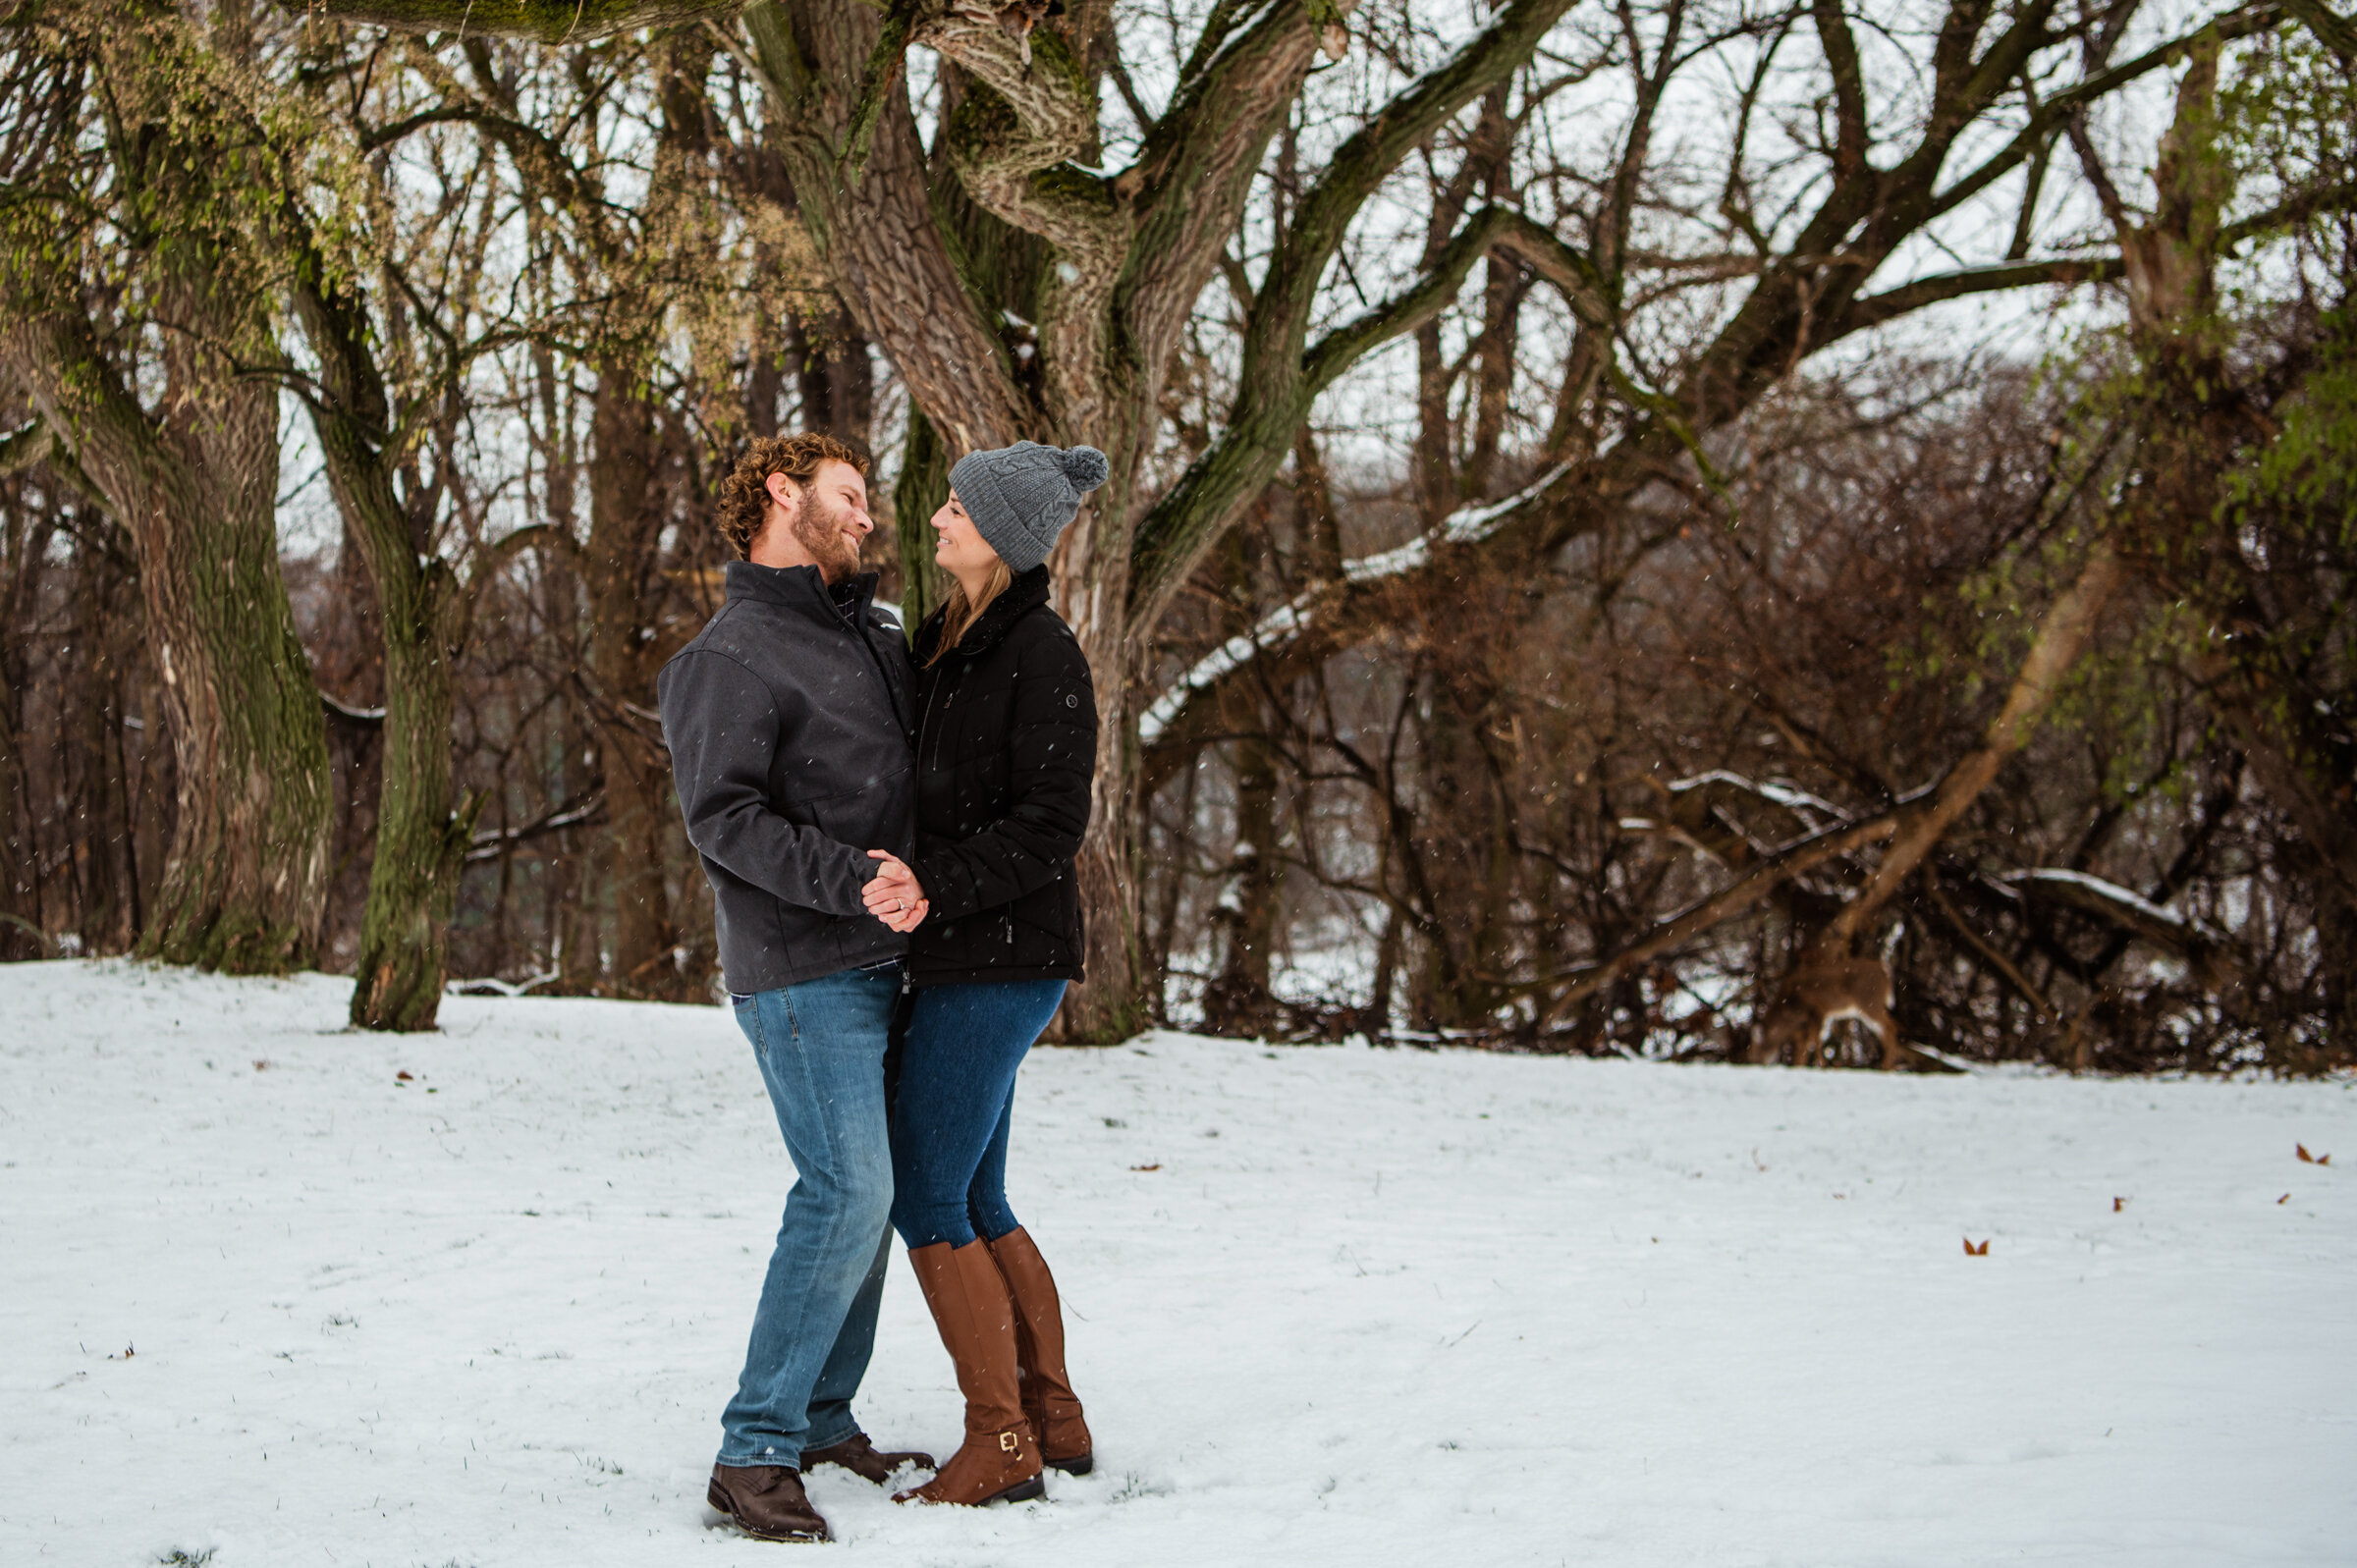 Irondequoit_Beer_Company_Durand_Eastman_Park_Rochester_Engagement_Session_JILL_STUDIO_Rochester_NY_Photographer_7278.jpg